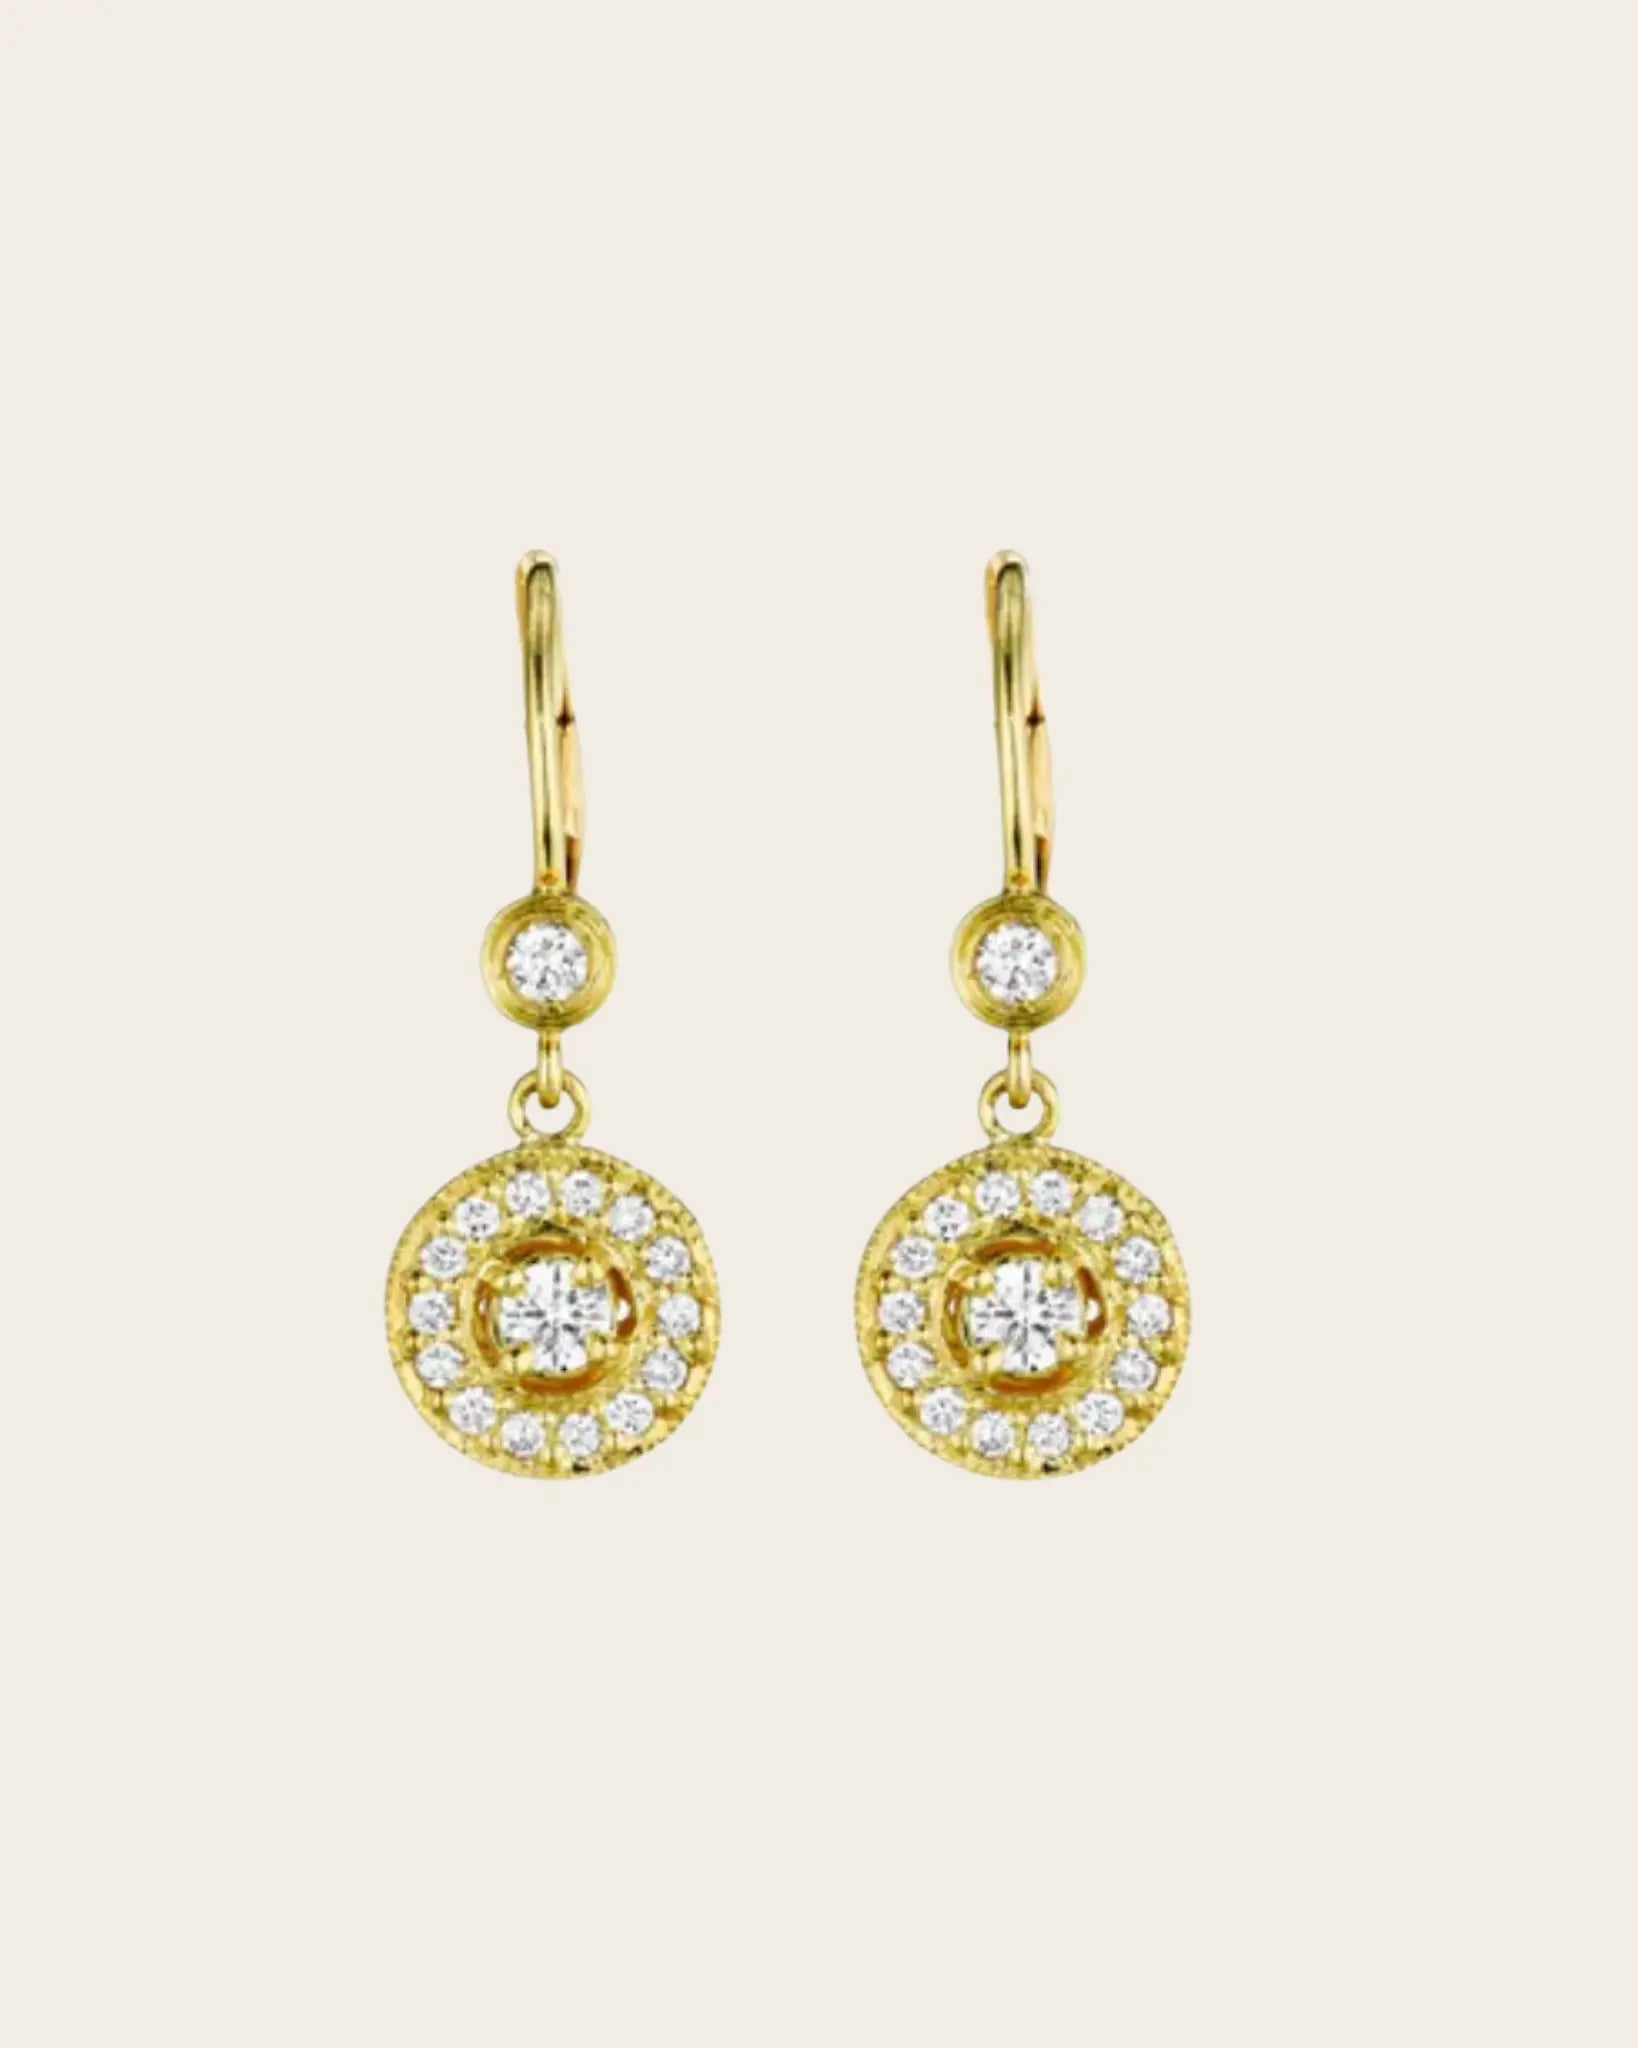 Classic Round Diamond Earrings Classic Round Diamond Earrings Penny Preville Penny Preville  Squash Blossom Vail